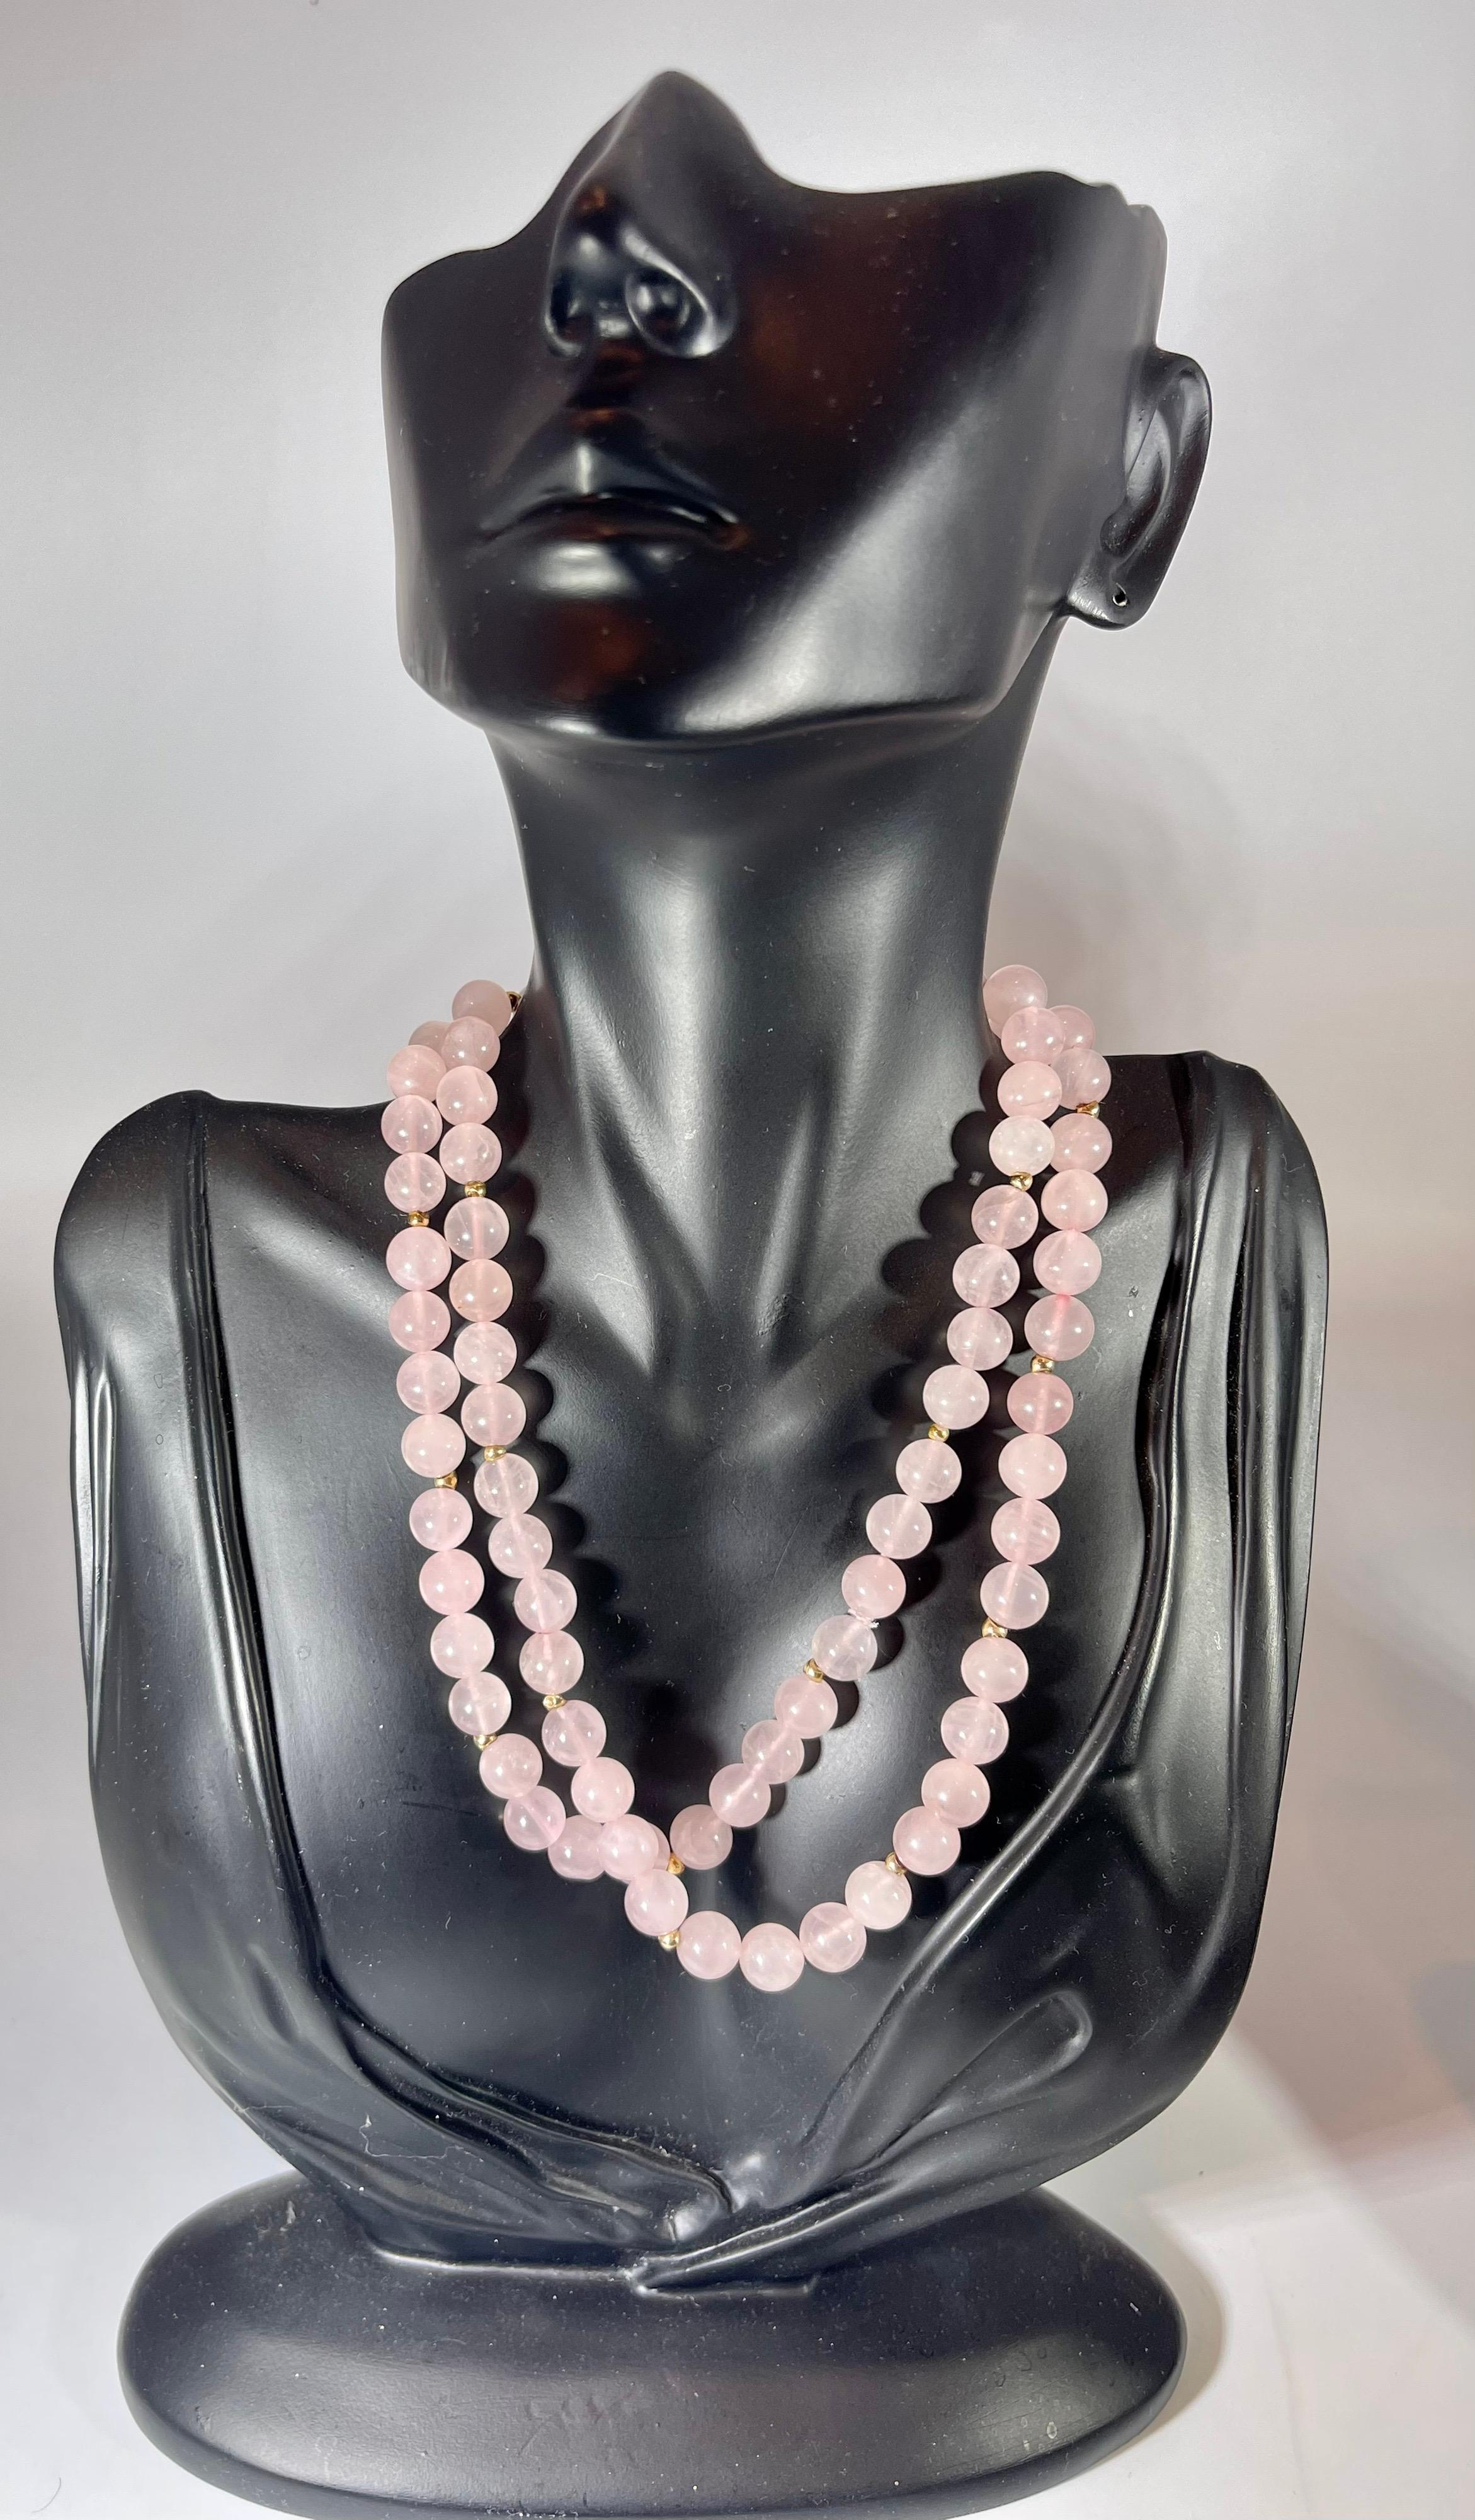 Women's Grade A+ Rose Quartz Crystal Bead Necklace 8.5 mm, With 14 K Gold Beads, Genuine For Sale